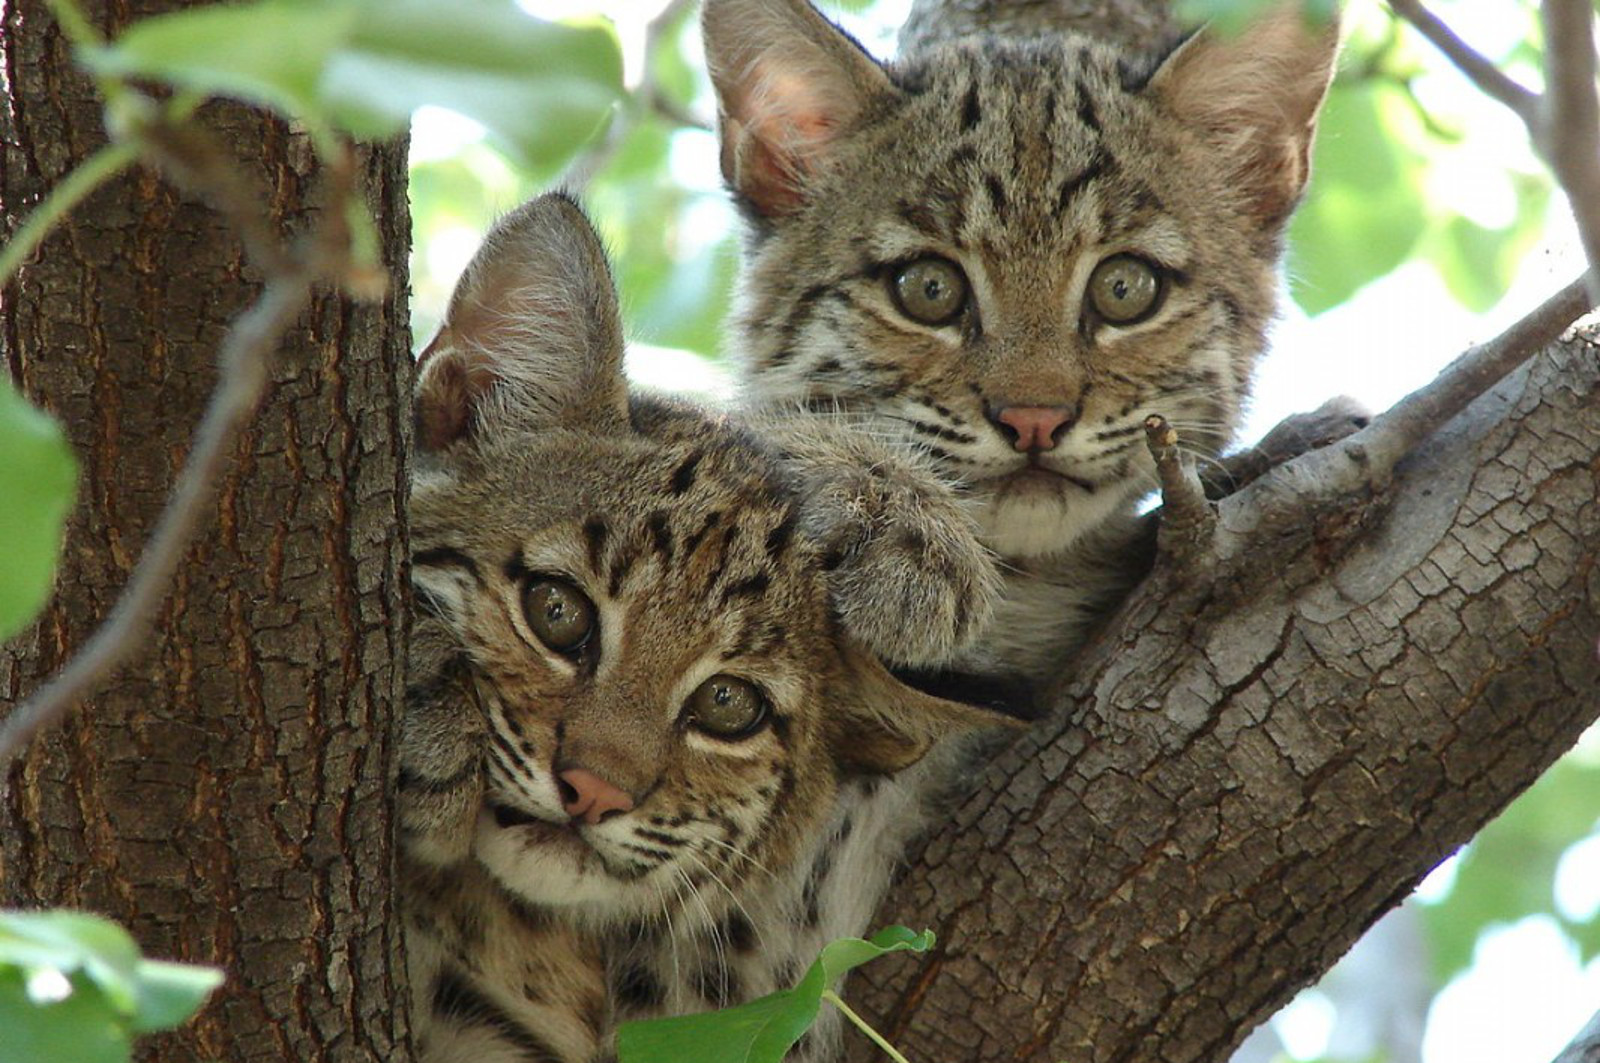 California's Bobcats Are Being Killed to Fuel the International Fur Trade. Here's What You Can Do